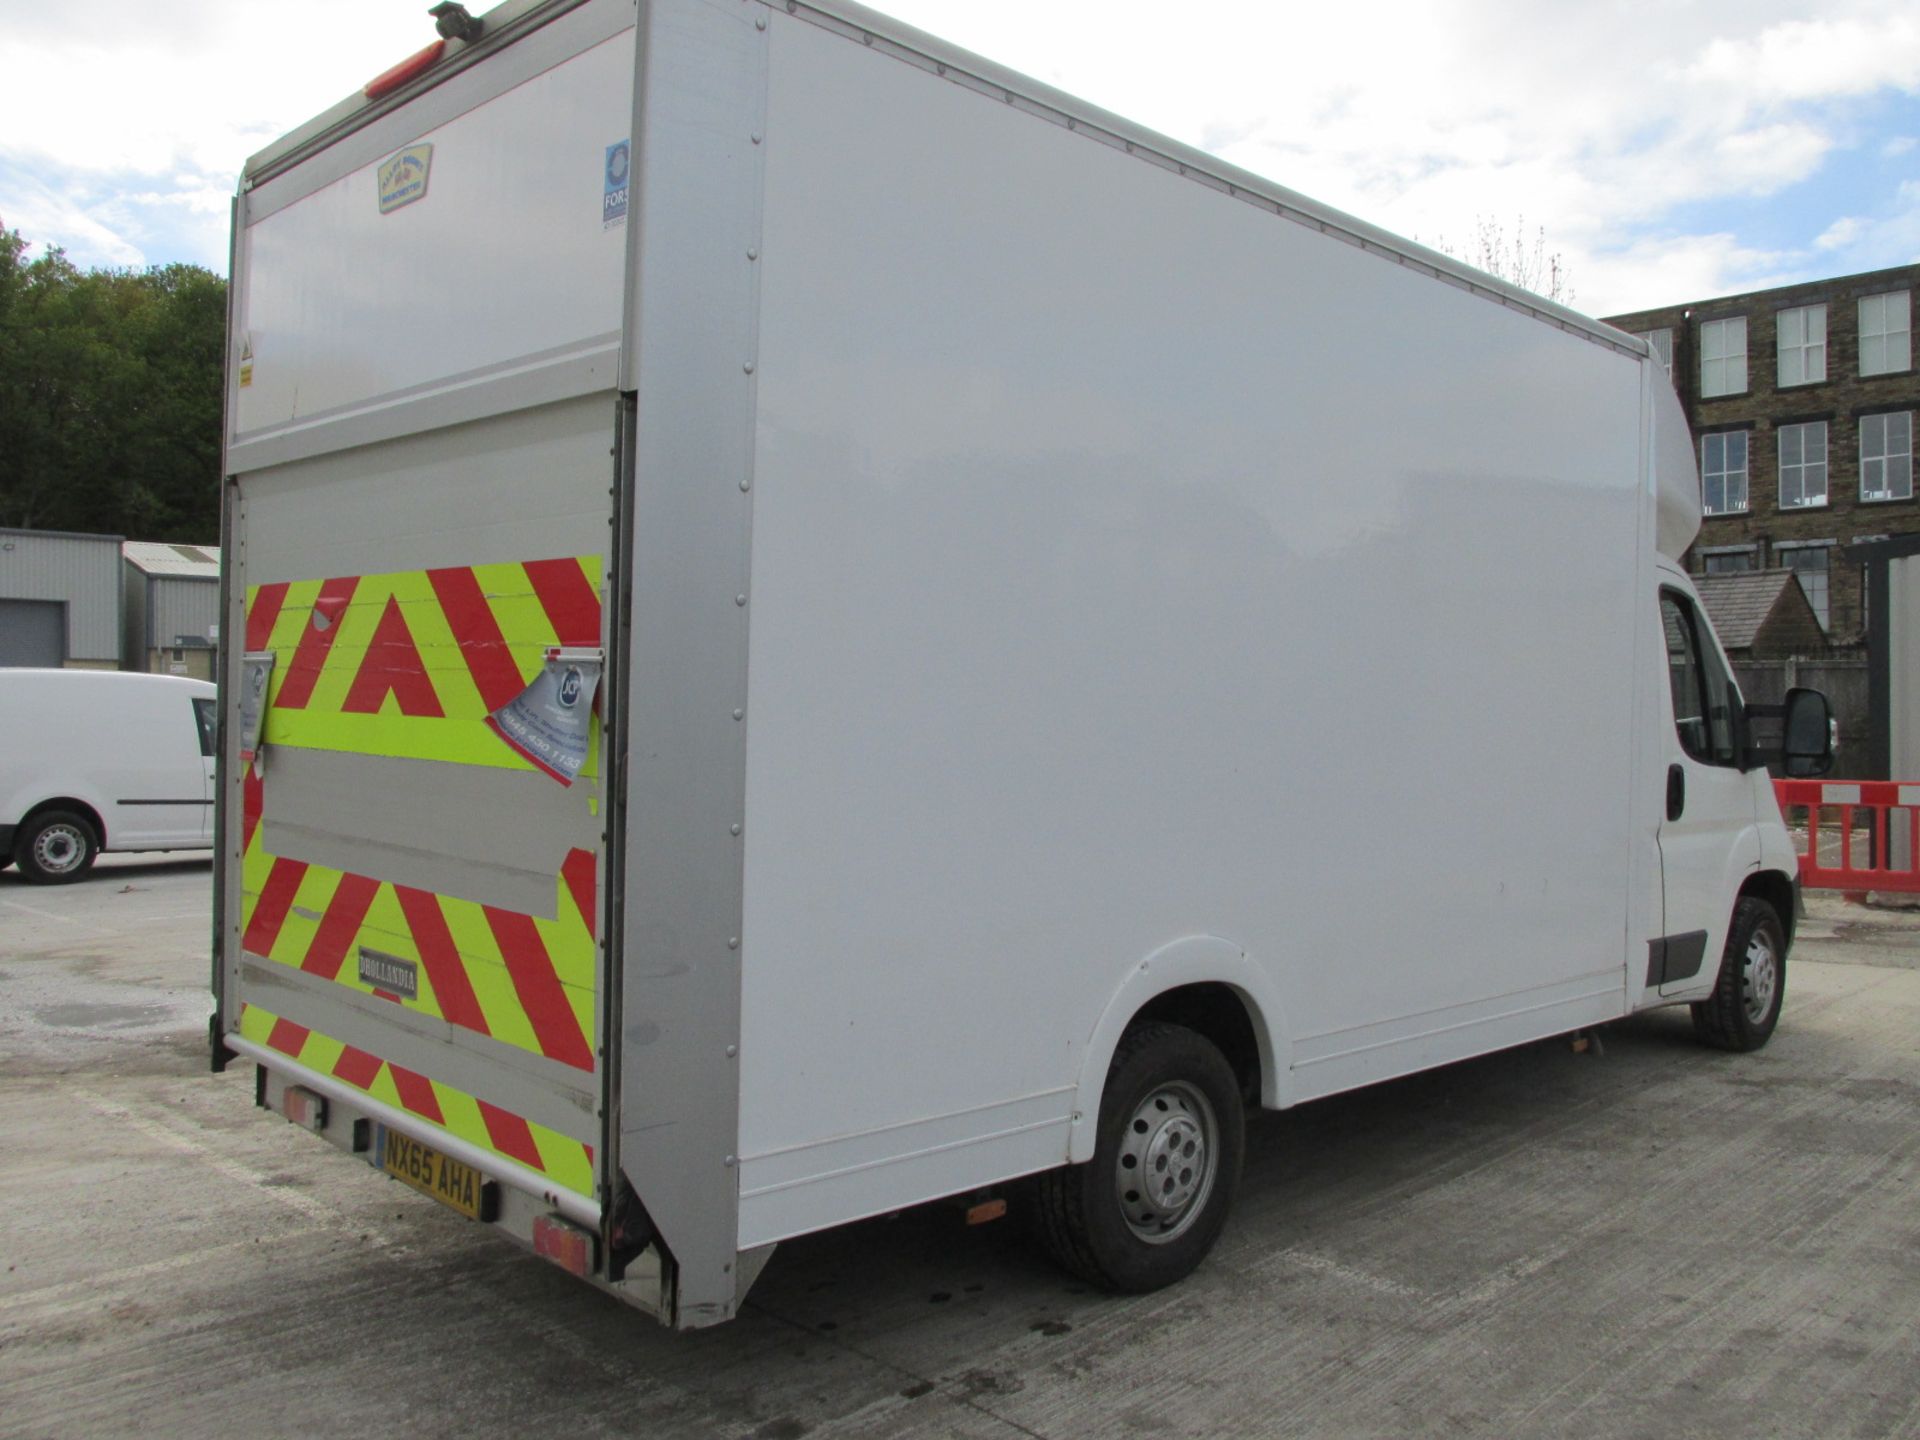 2015 "65 Reg" Peugeot Boxer 4.1m Low Loader Box Van with Dhollandia Tail Lift - over £38k when new - Image 4 of 12